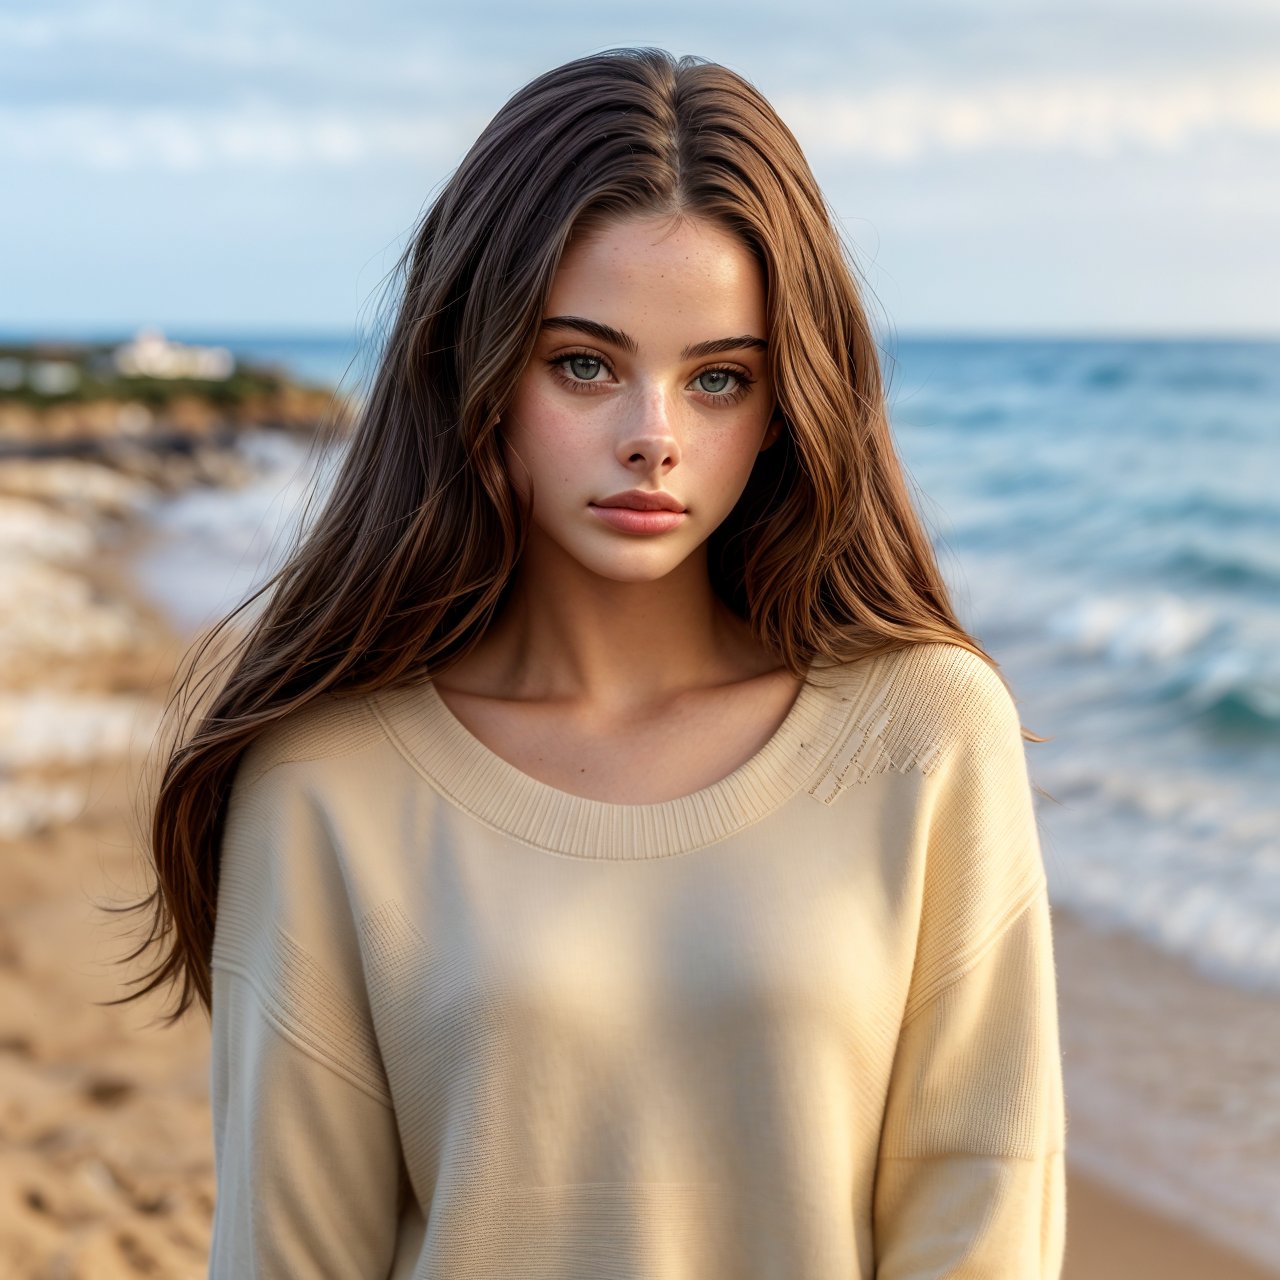 (masterpiece:1.3), best quality, extra resolution view from above, portrait of adorable (AIDA_LoRA_MeW2023:1.13) <lora:AIDA_LoRA_MeW2023:0.96> in (simple cream sweater:1.1), [stunning woman], pretty face, flirting, cinematic, composition, kkw-ph1, (colorful:1.1), (on the seashore:1.1), sea, sand, sky, (on the beach:1.1), sunlight, outdoors